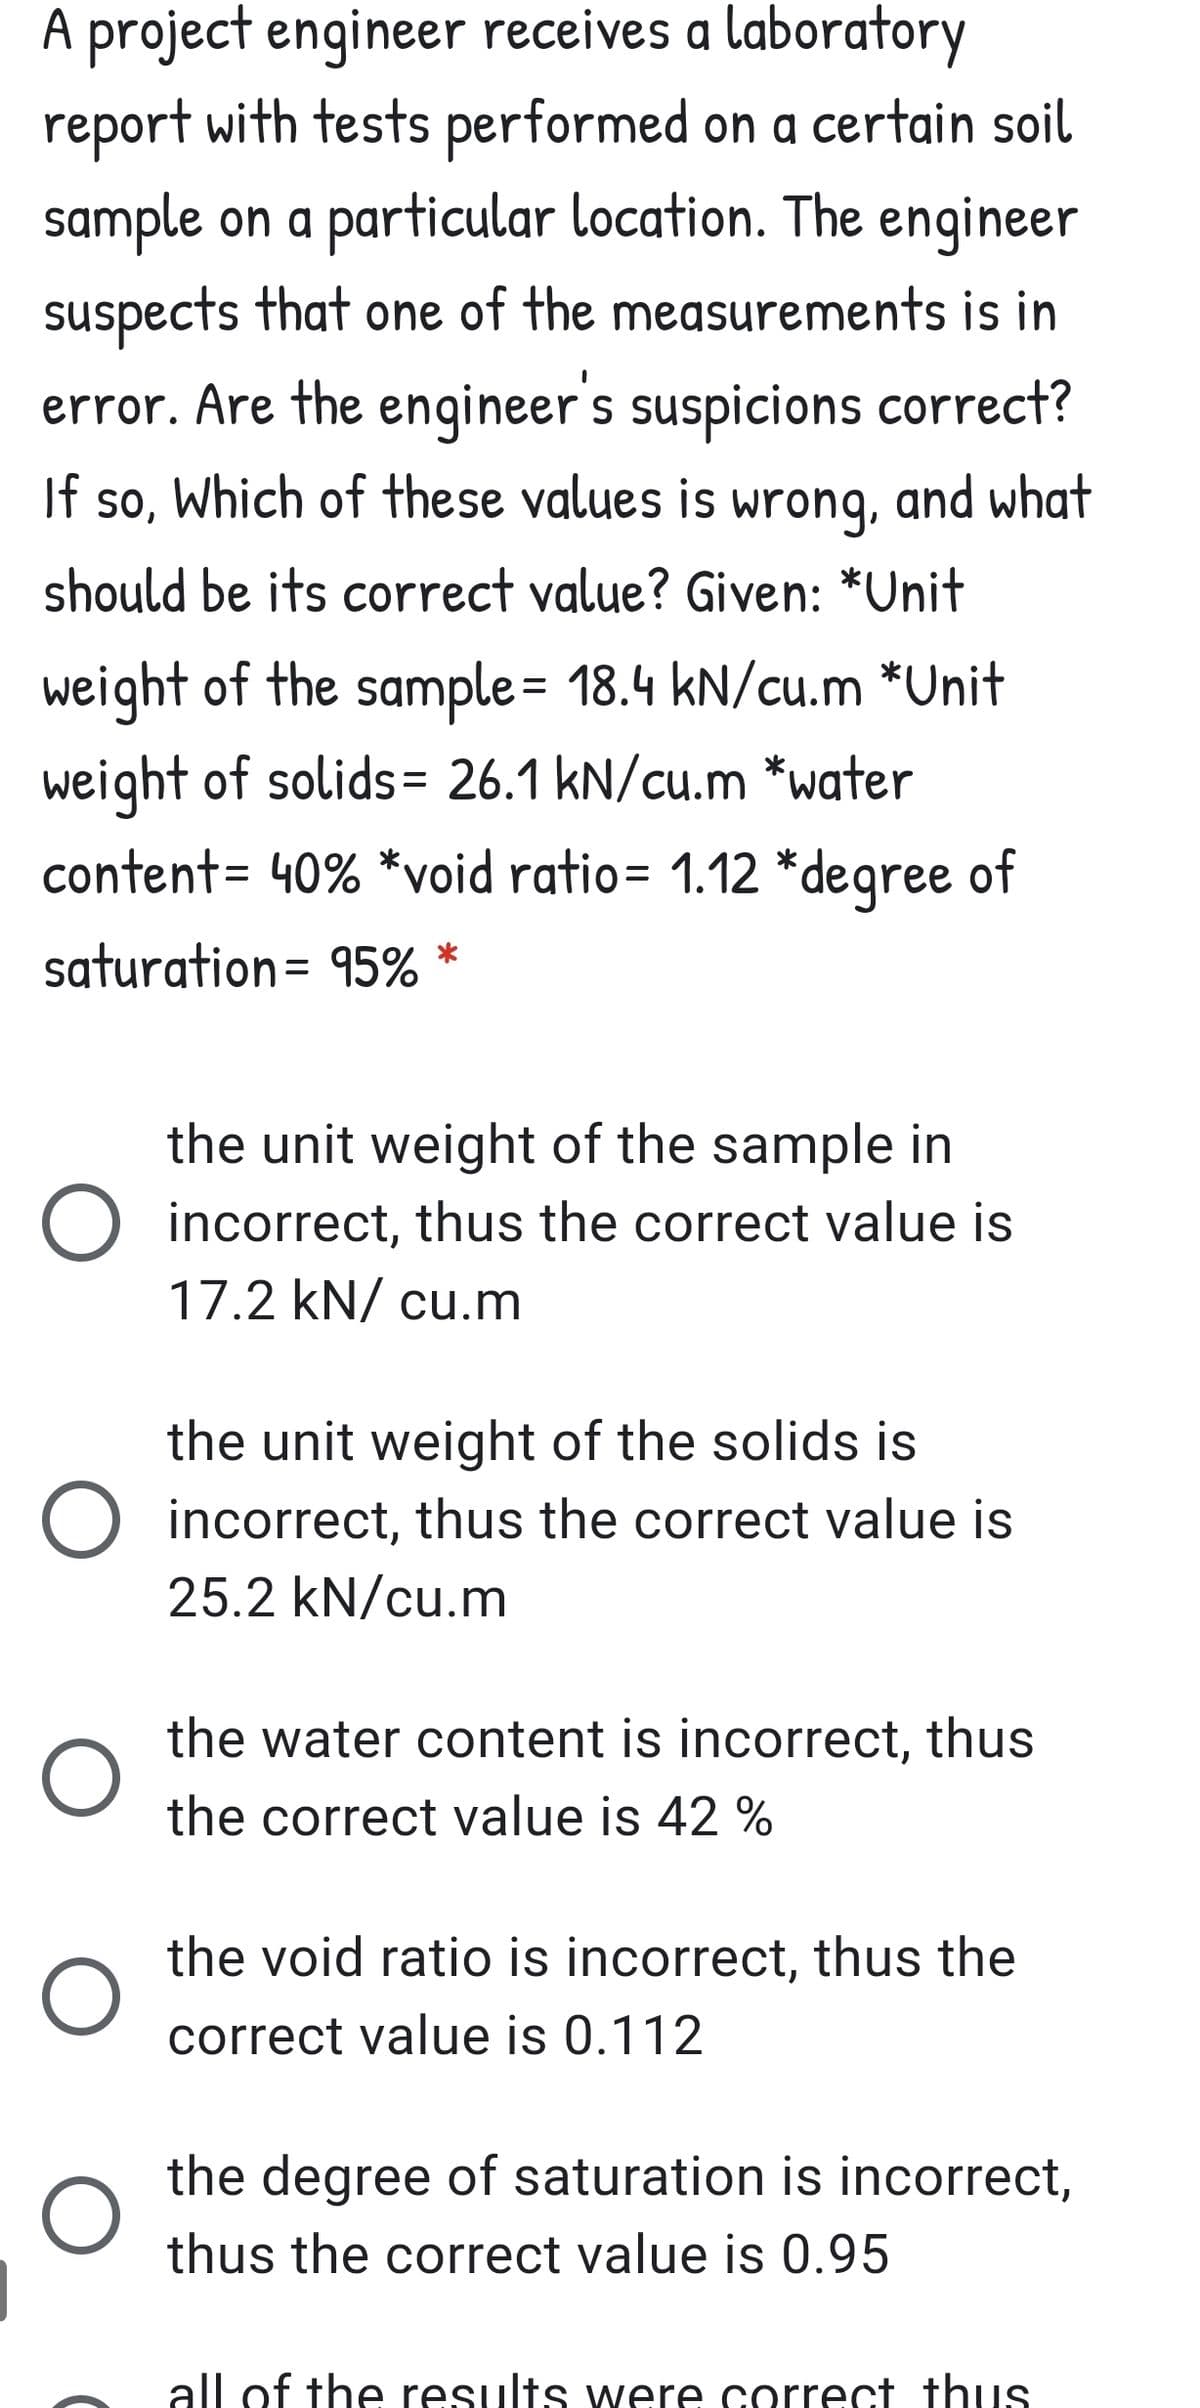 A project engineer receives a laboratory
report with tests performed on a certain soil
sample on a particular location. The engineer
suspects that one of the measurements is in
error. Are the engineer's suspicions correct?
Which of these values is wrong, and what
If so,
so,
should be its correct value? Given: *Unit
weight of the sample= 18.4 kN/cu.m *Unit
weight of solids= 26.1 kN/cu.m *water
content= 40% *void ratio= 1.12 *degree of
saturation= 95% *
%3D
the unit weight of the sample in
O incorrect, thus the correct value is
17.2 kN/ cu.m
the unit weight of the solids is
O incorrect, thus the correct value is
25.2 kN/cu.m
the water content is incorrect, thus
the correct value is 42 %
the void ratio is incorrect, thus the
correct value is 0.112
the degree of saturation is incorrect,
thus the correct value is 0.95
all of the results were correct thuS
